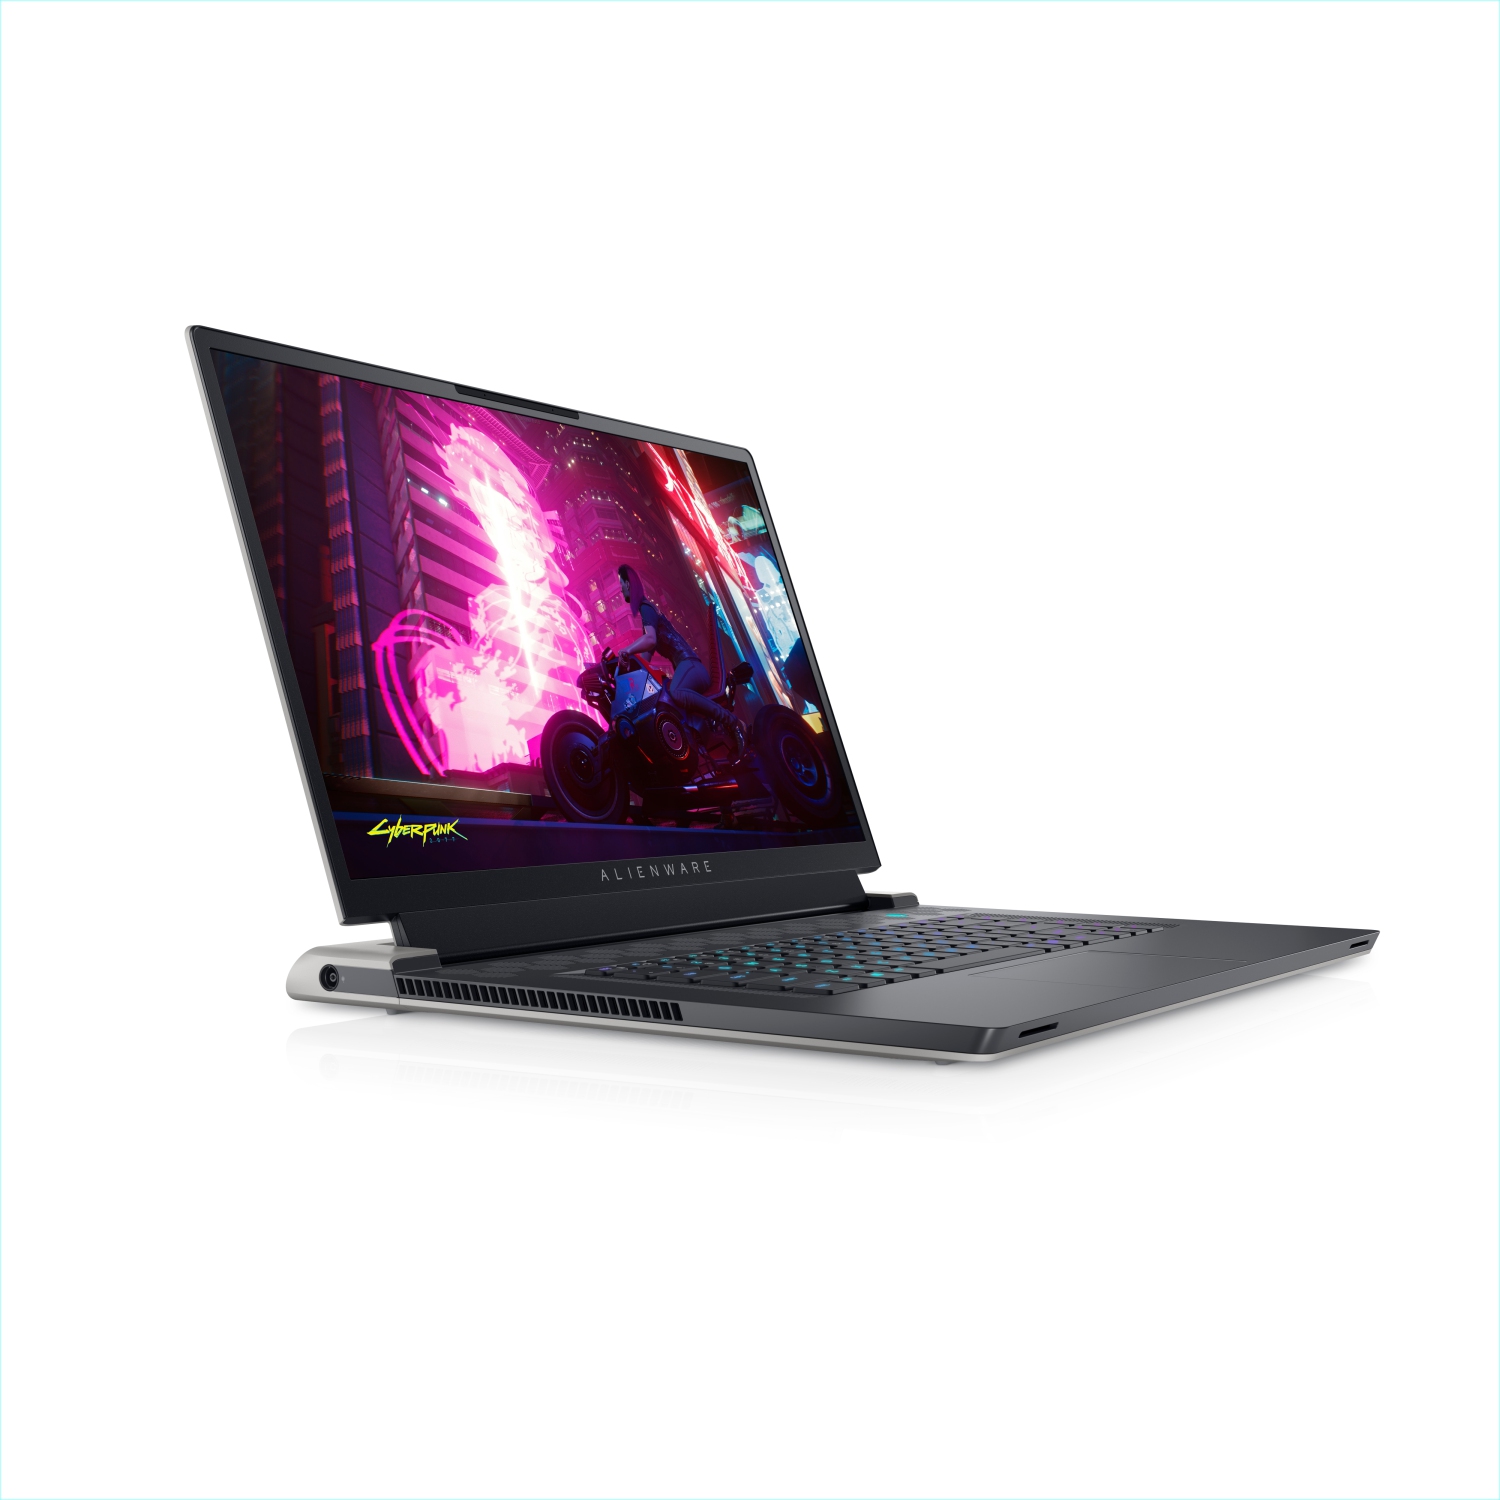 Refurbished (Excellent) - Dell Alienware X17 R1 Gaming Laptop (2021), 17.3" FHD, Core i9, 2TB SSD, 64GB RAM, RTX 3080, 8 Cores @ 5 GHz, 11th Gen CPU Certified Refurbished